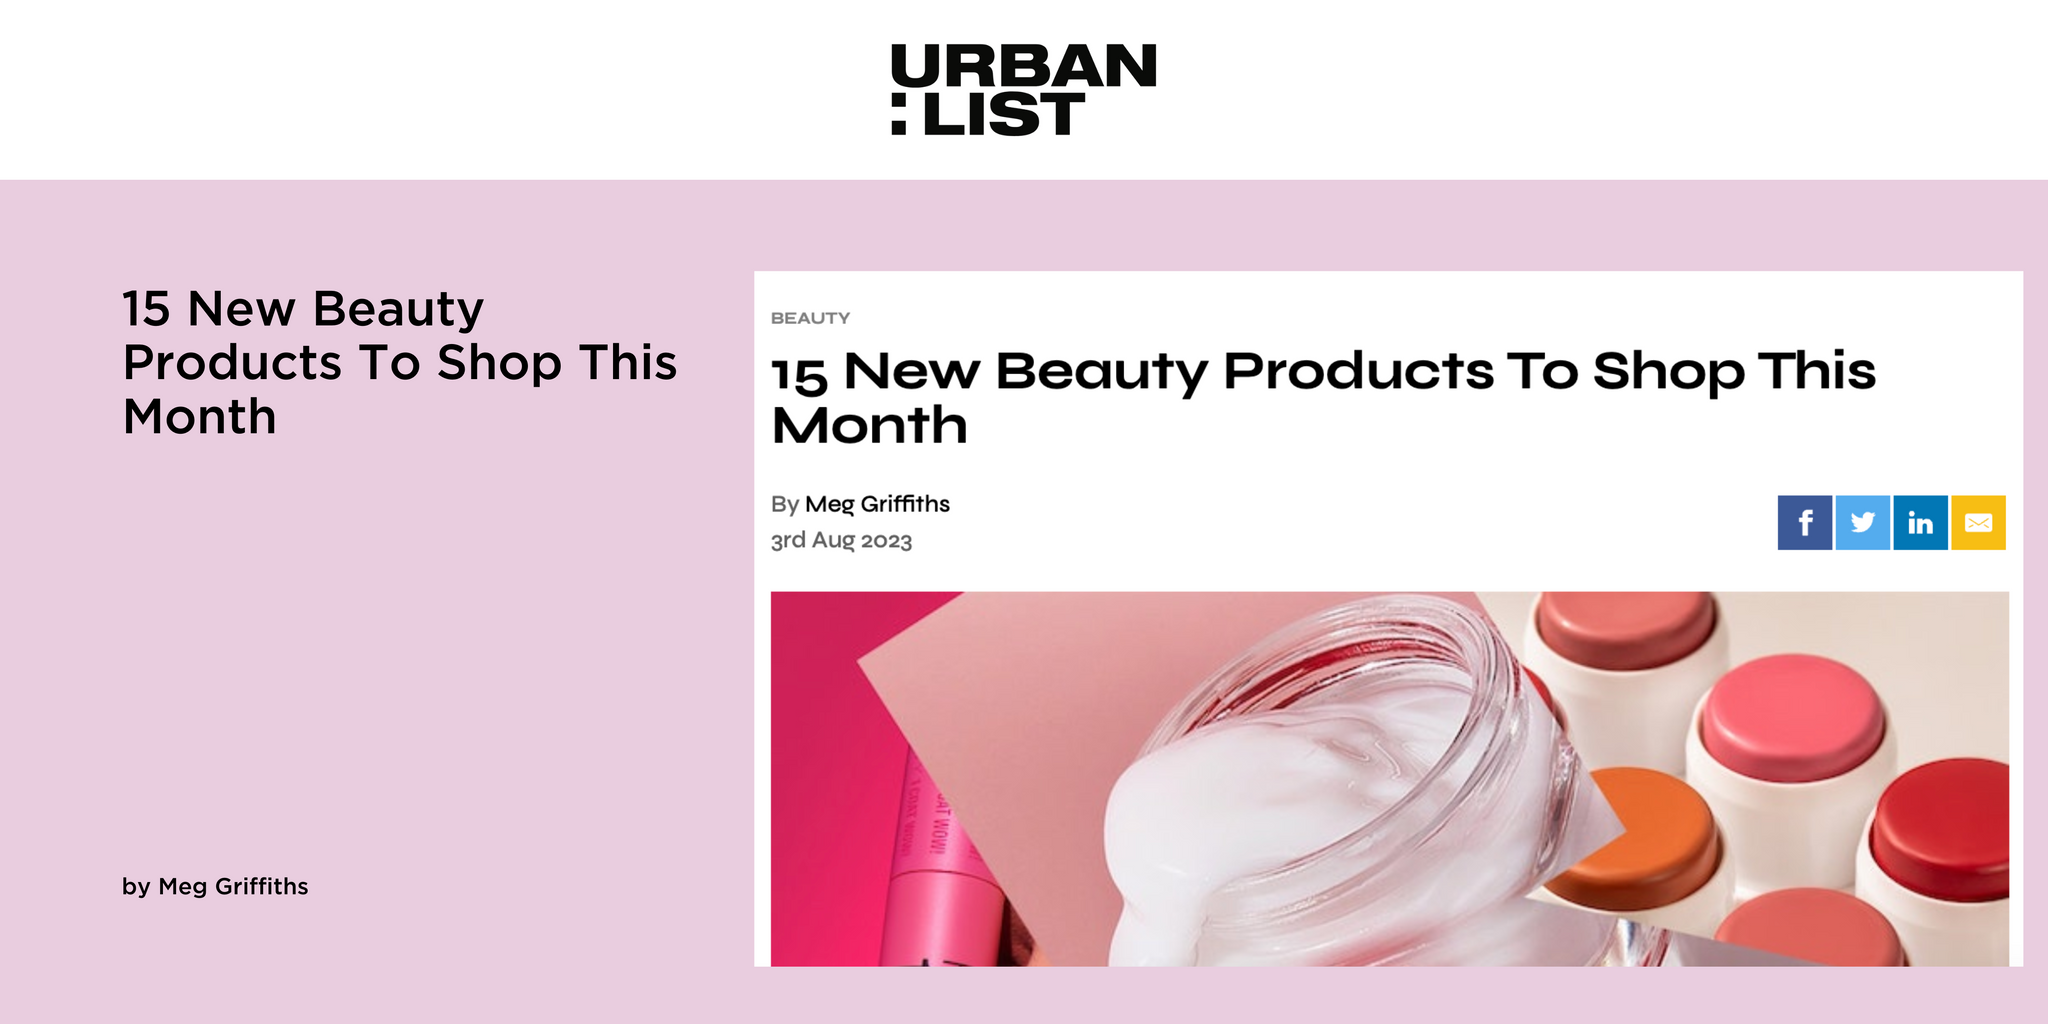 15 New Beauty Products To Shop This Month